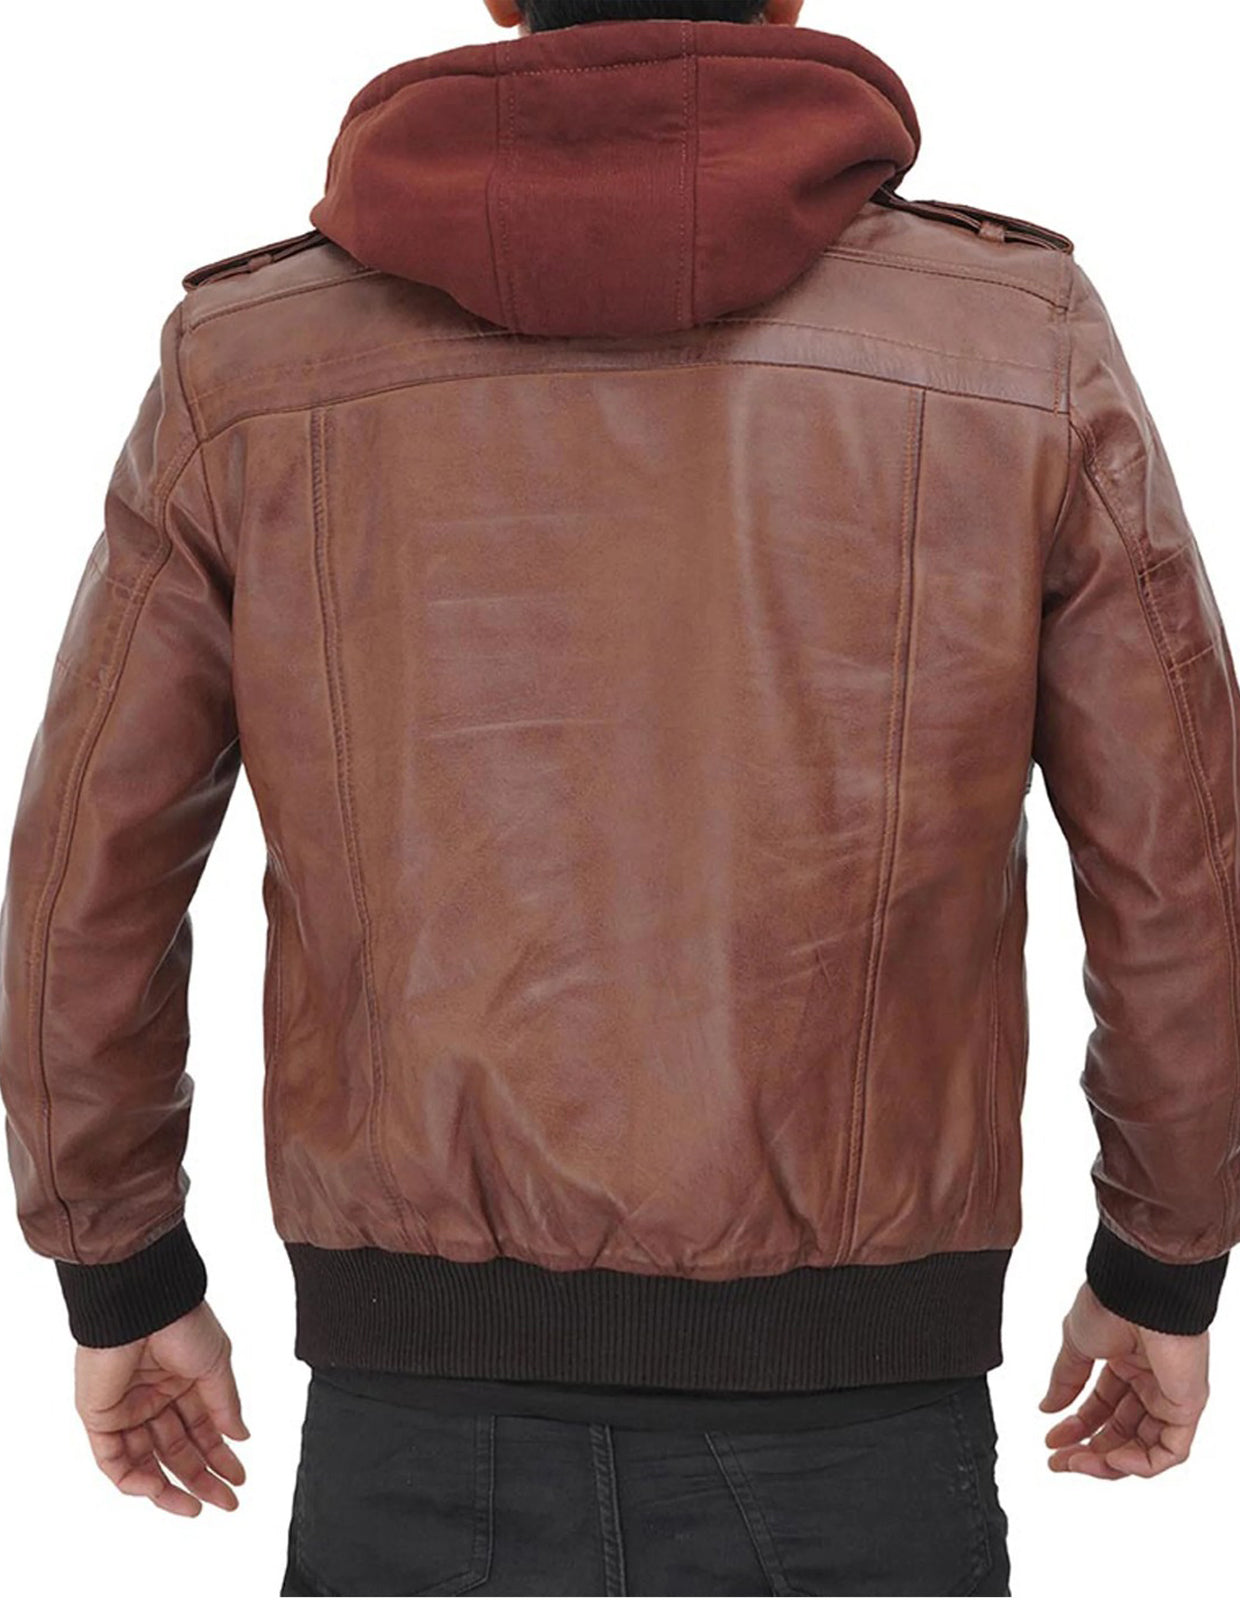 Men Brown Waxed Leather Casual Motorcycle Jacket with Removable Hood